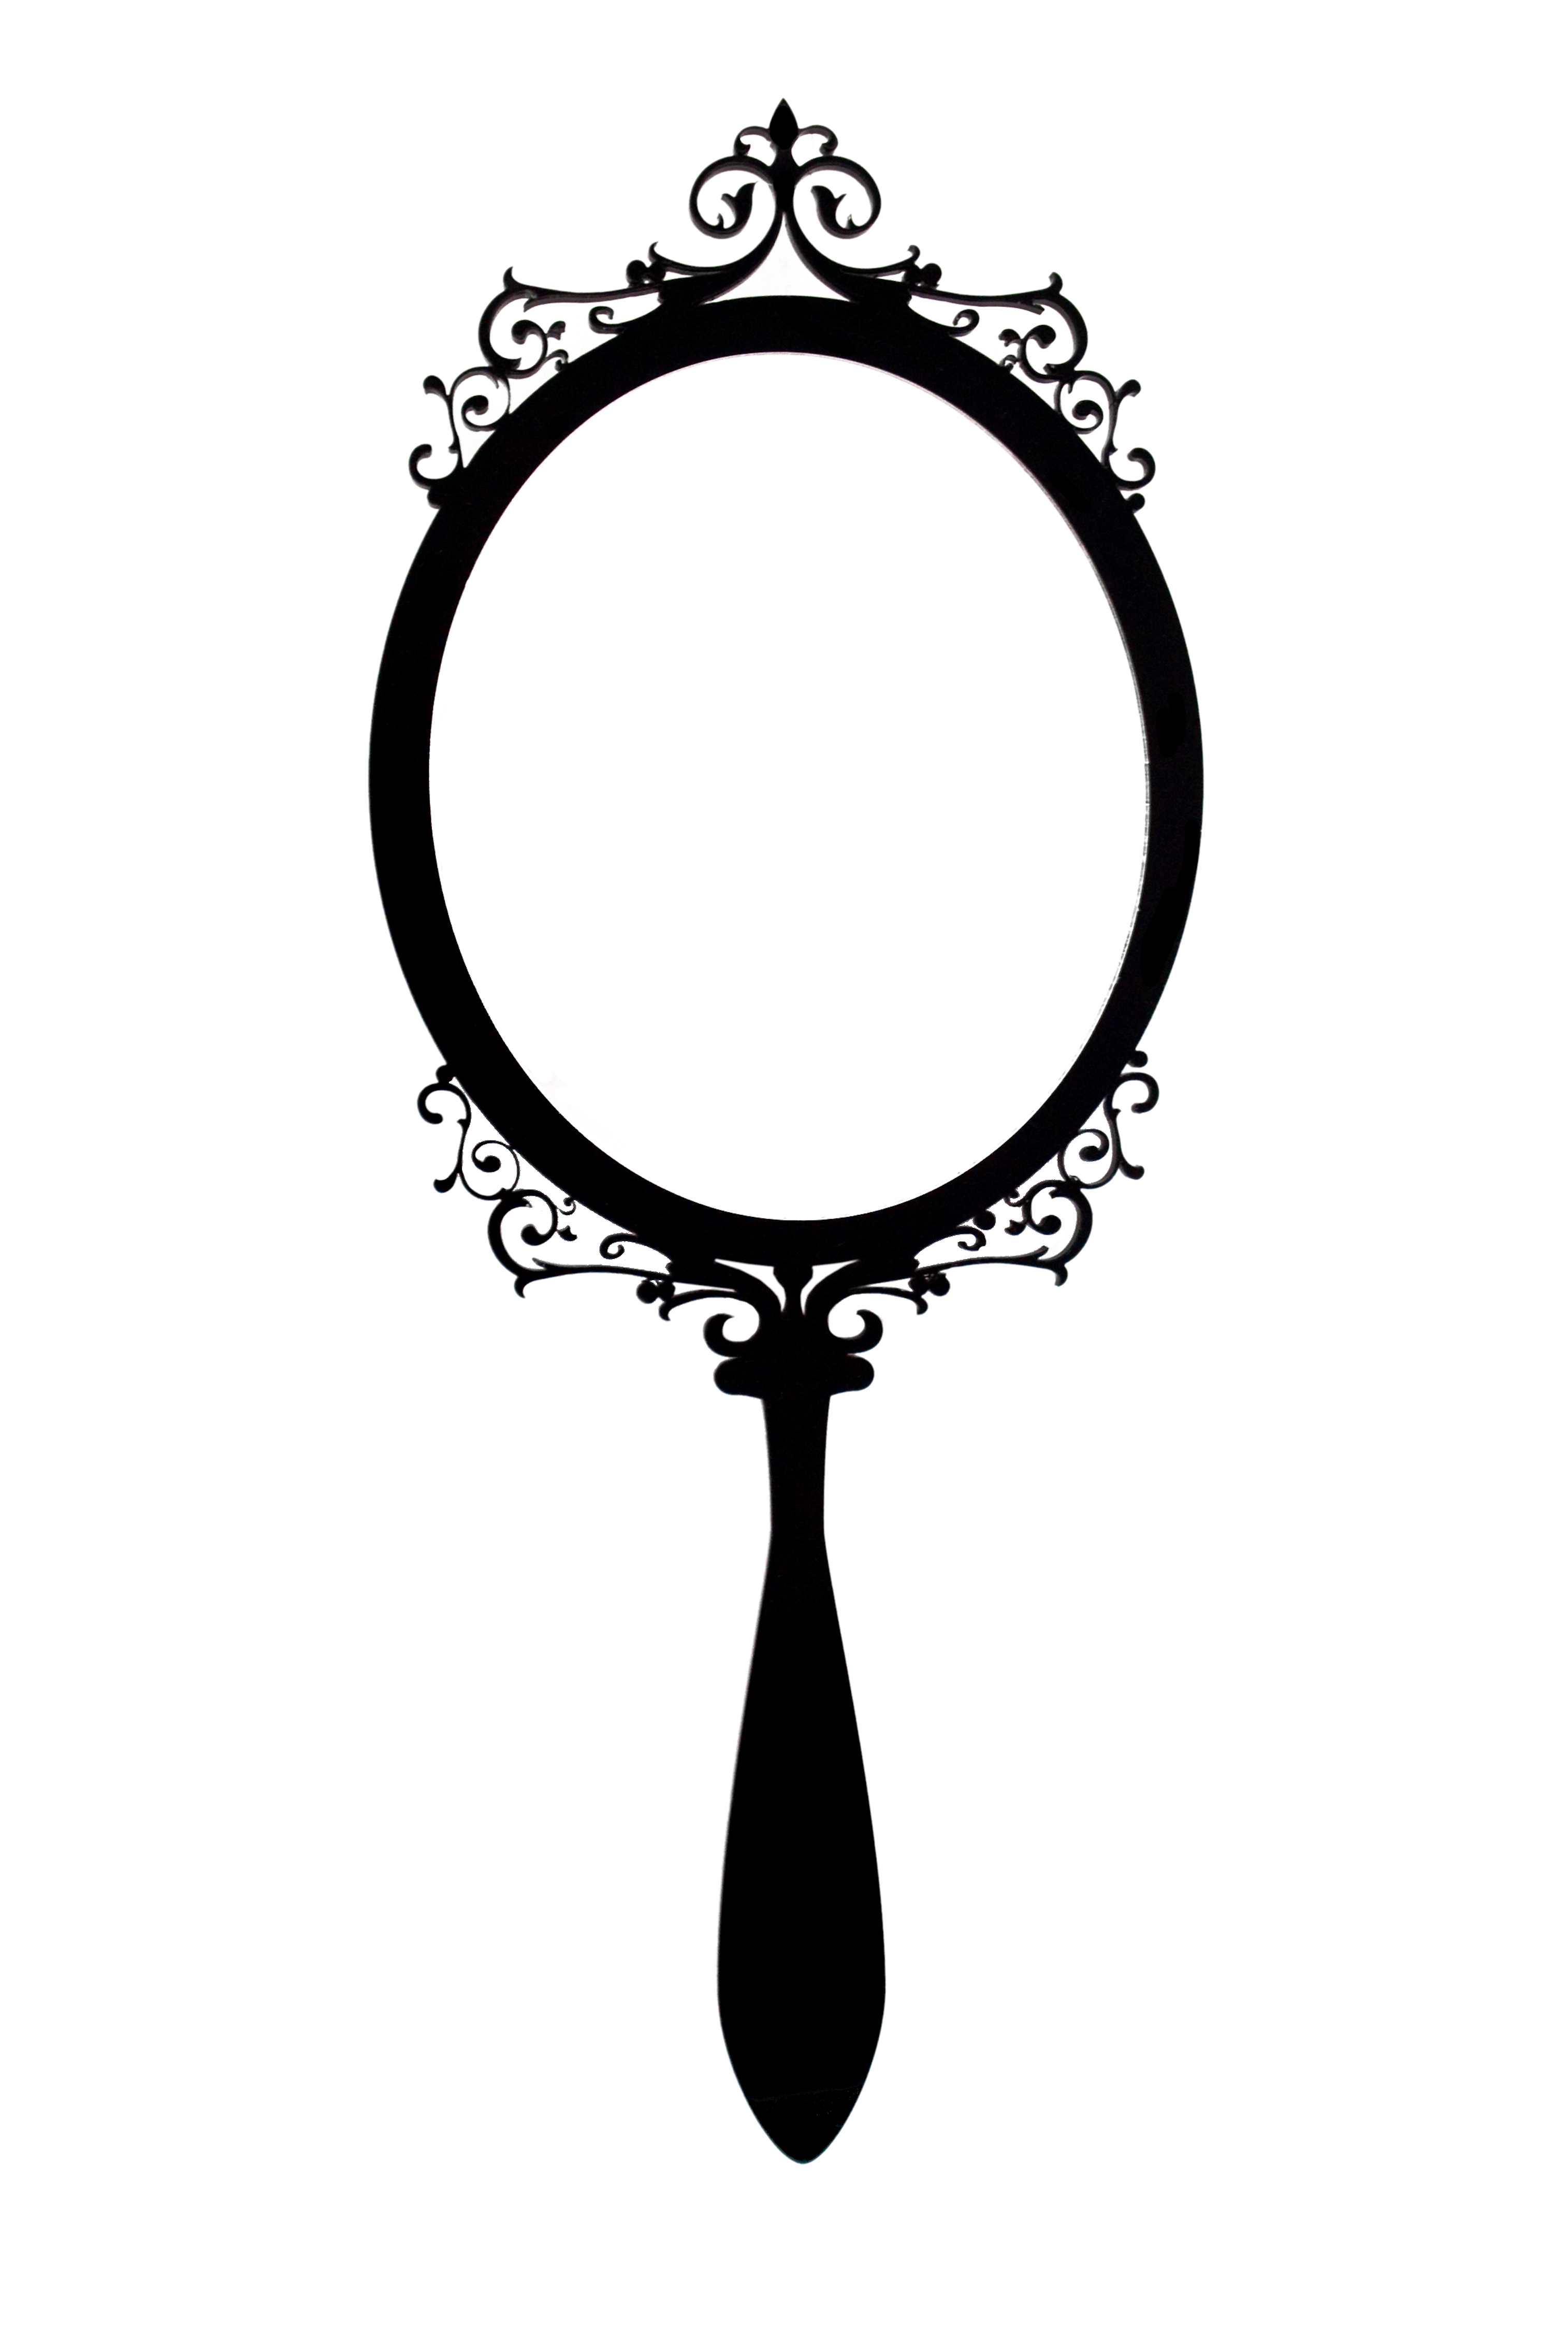 57 Images Of Hand Mirror Clipart You Can Use These Free Cliparts For